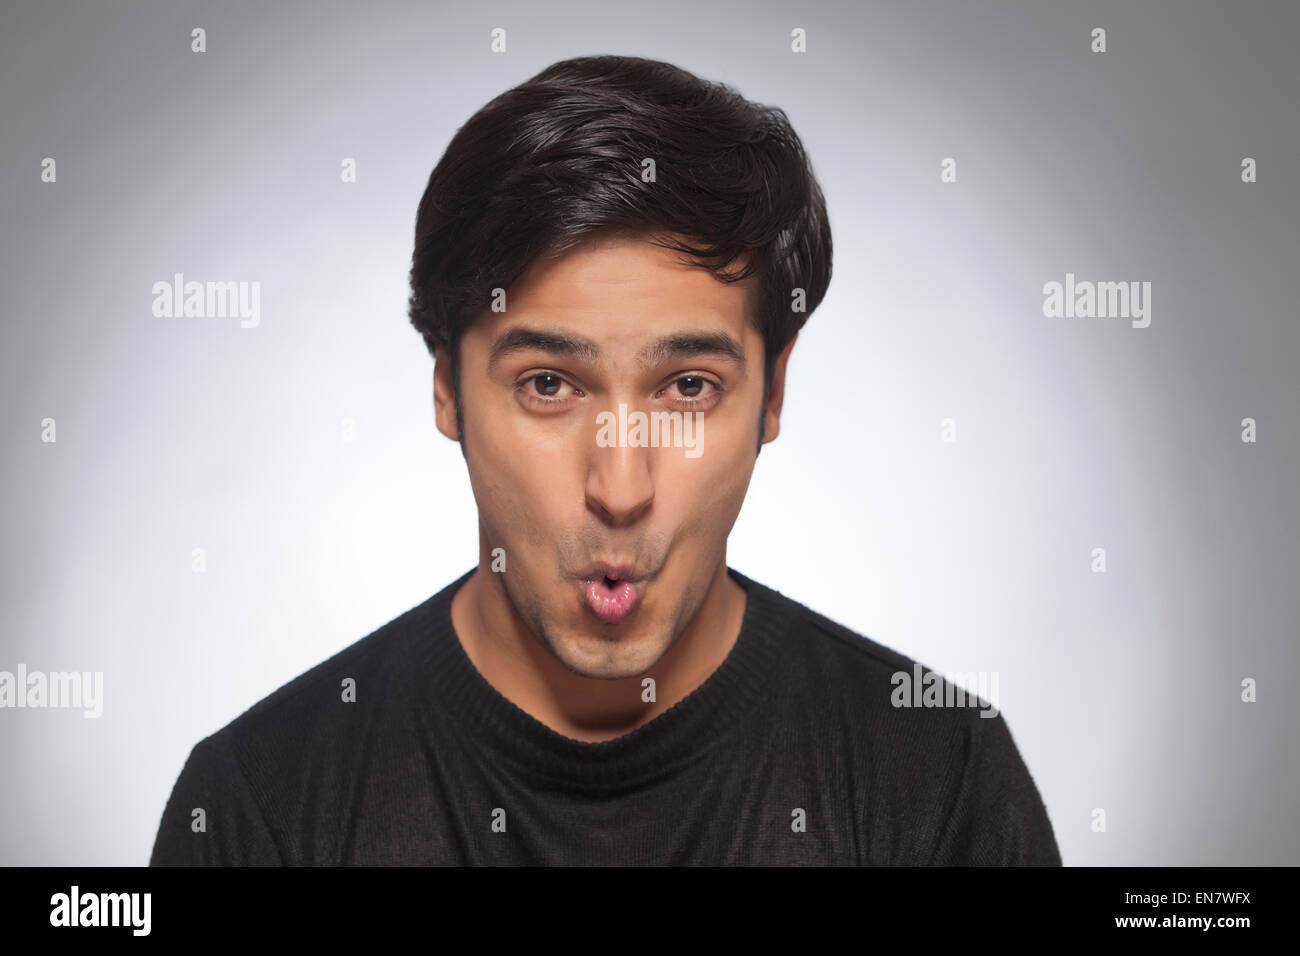 Portrait of a young man making a face Stock Photo